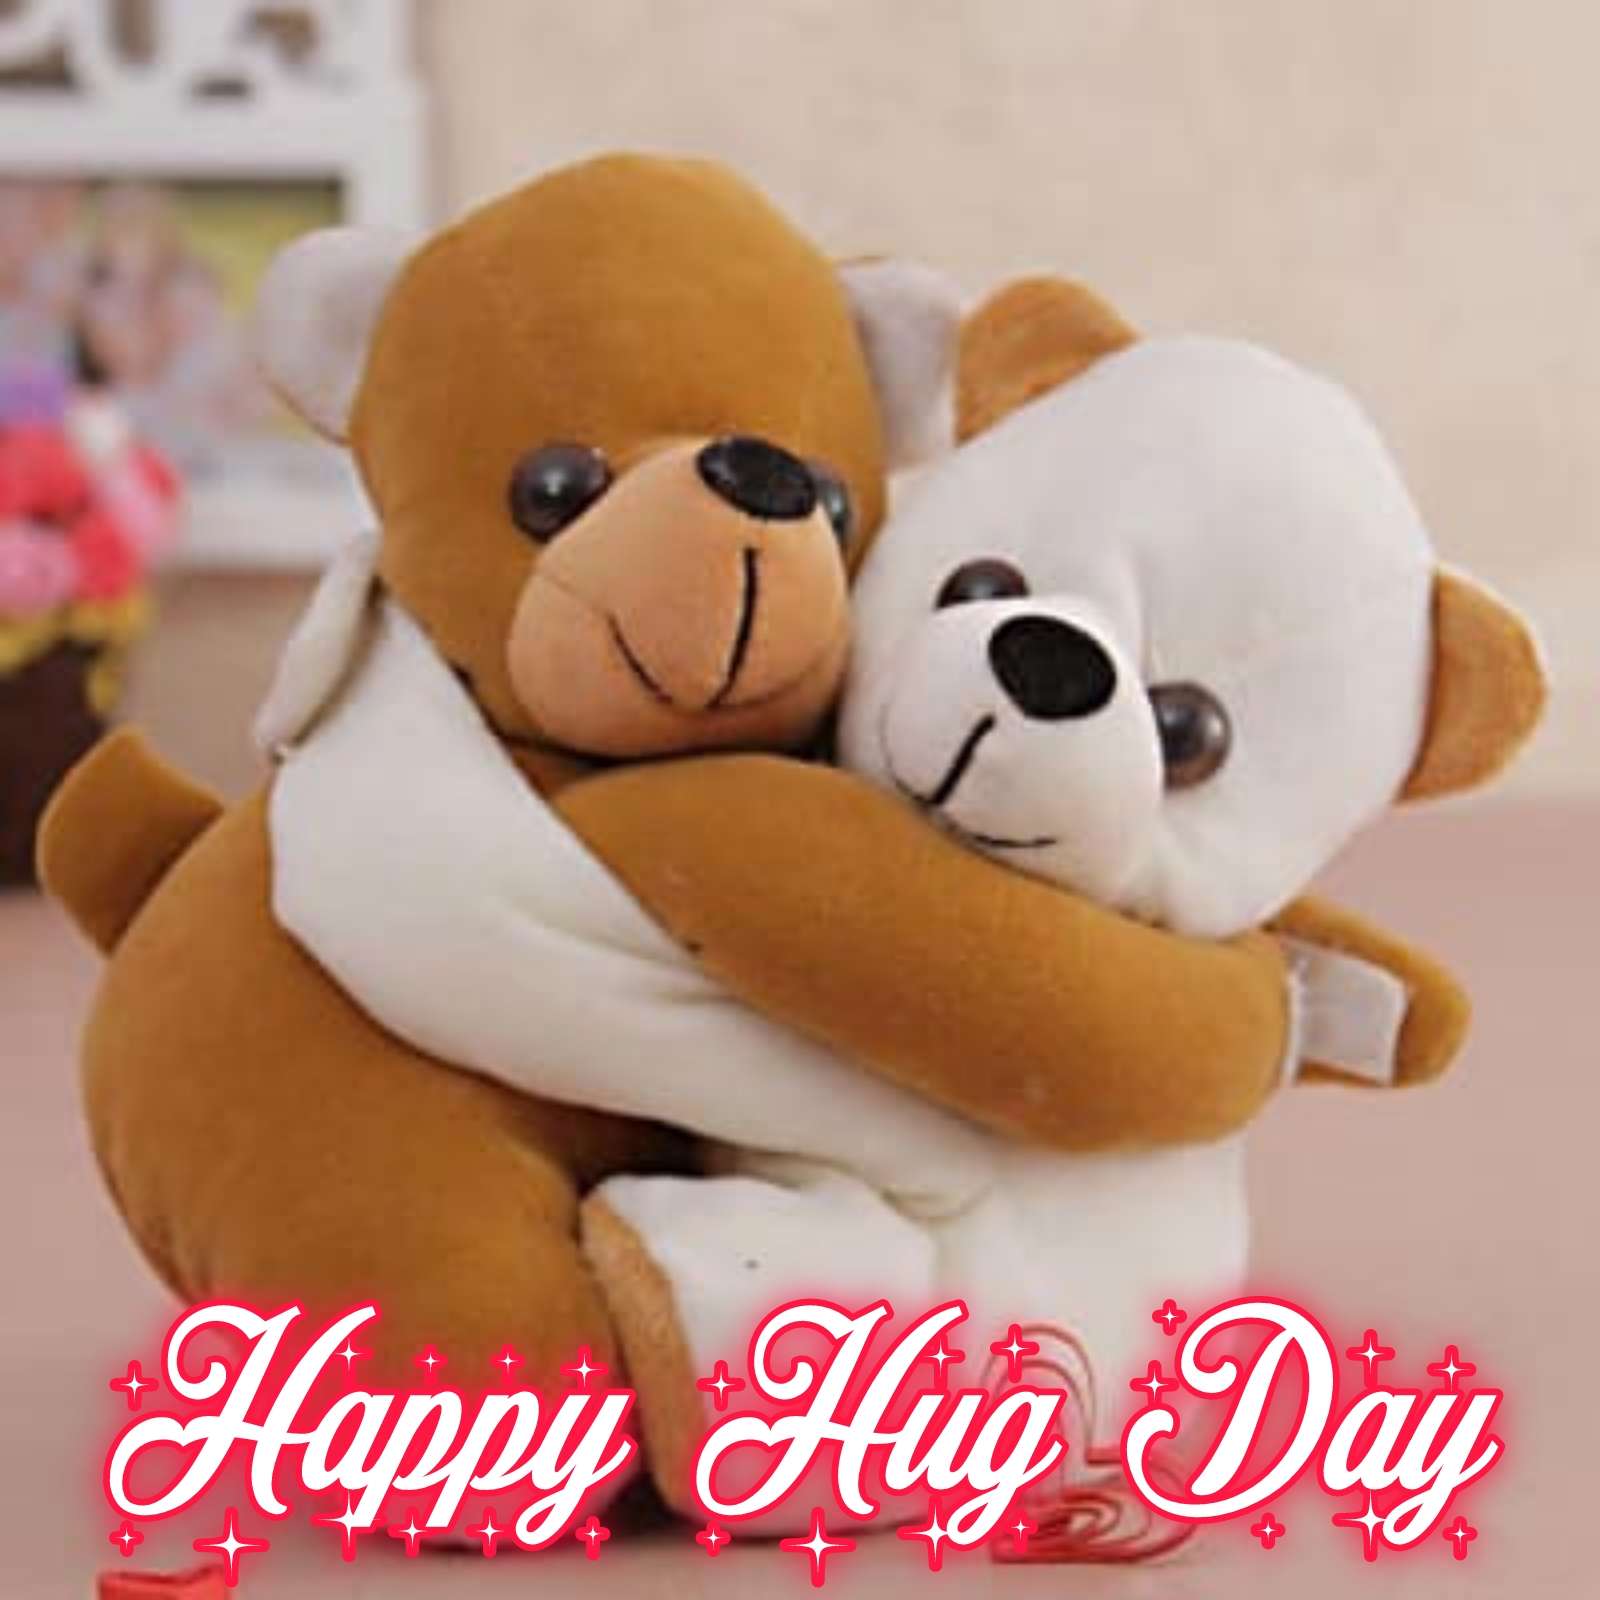 Happy Hug Day Teddy Images Download